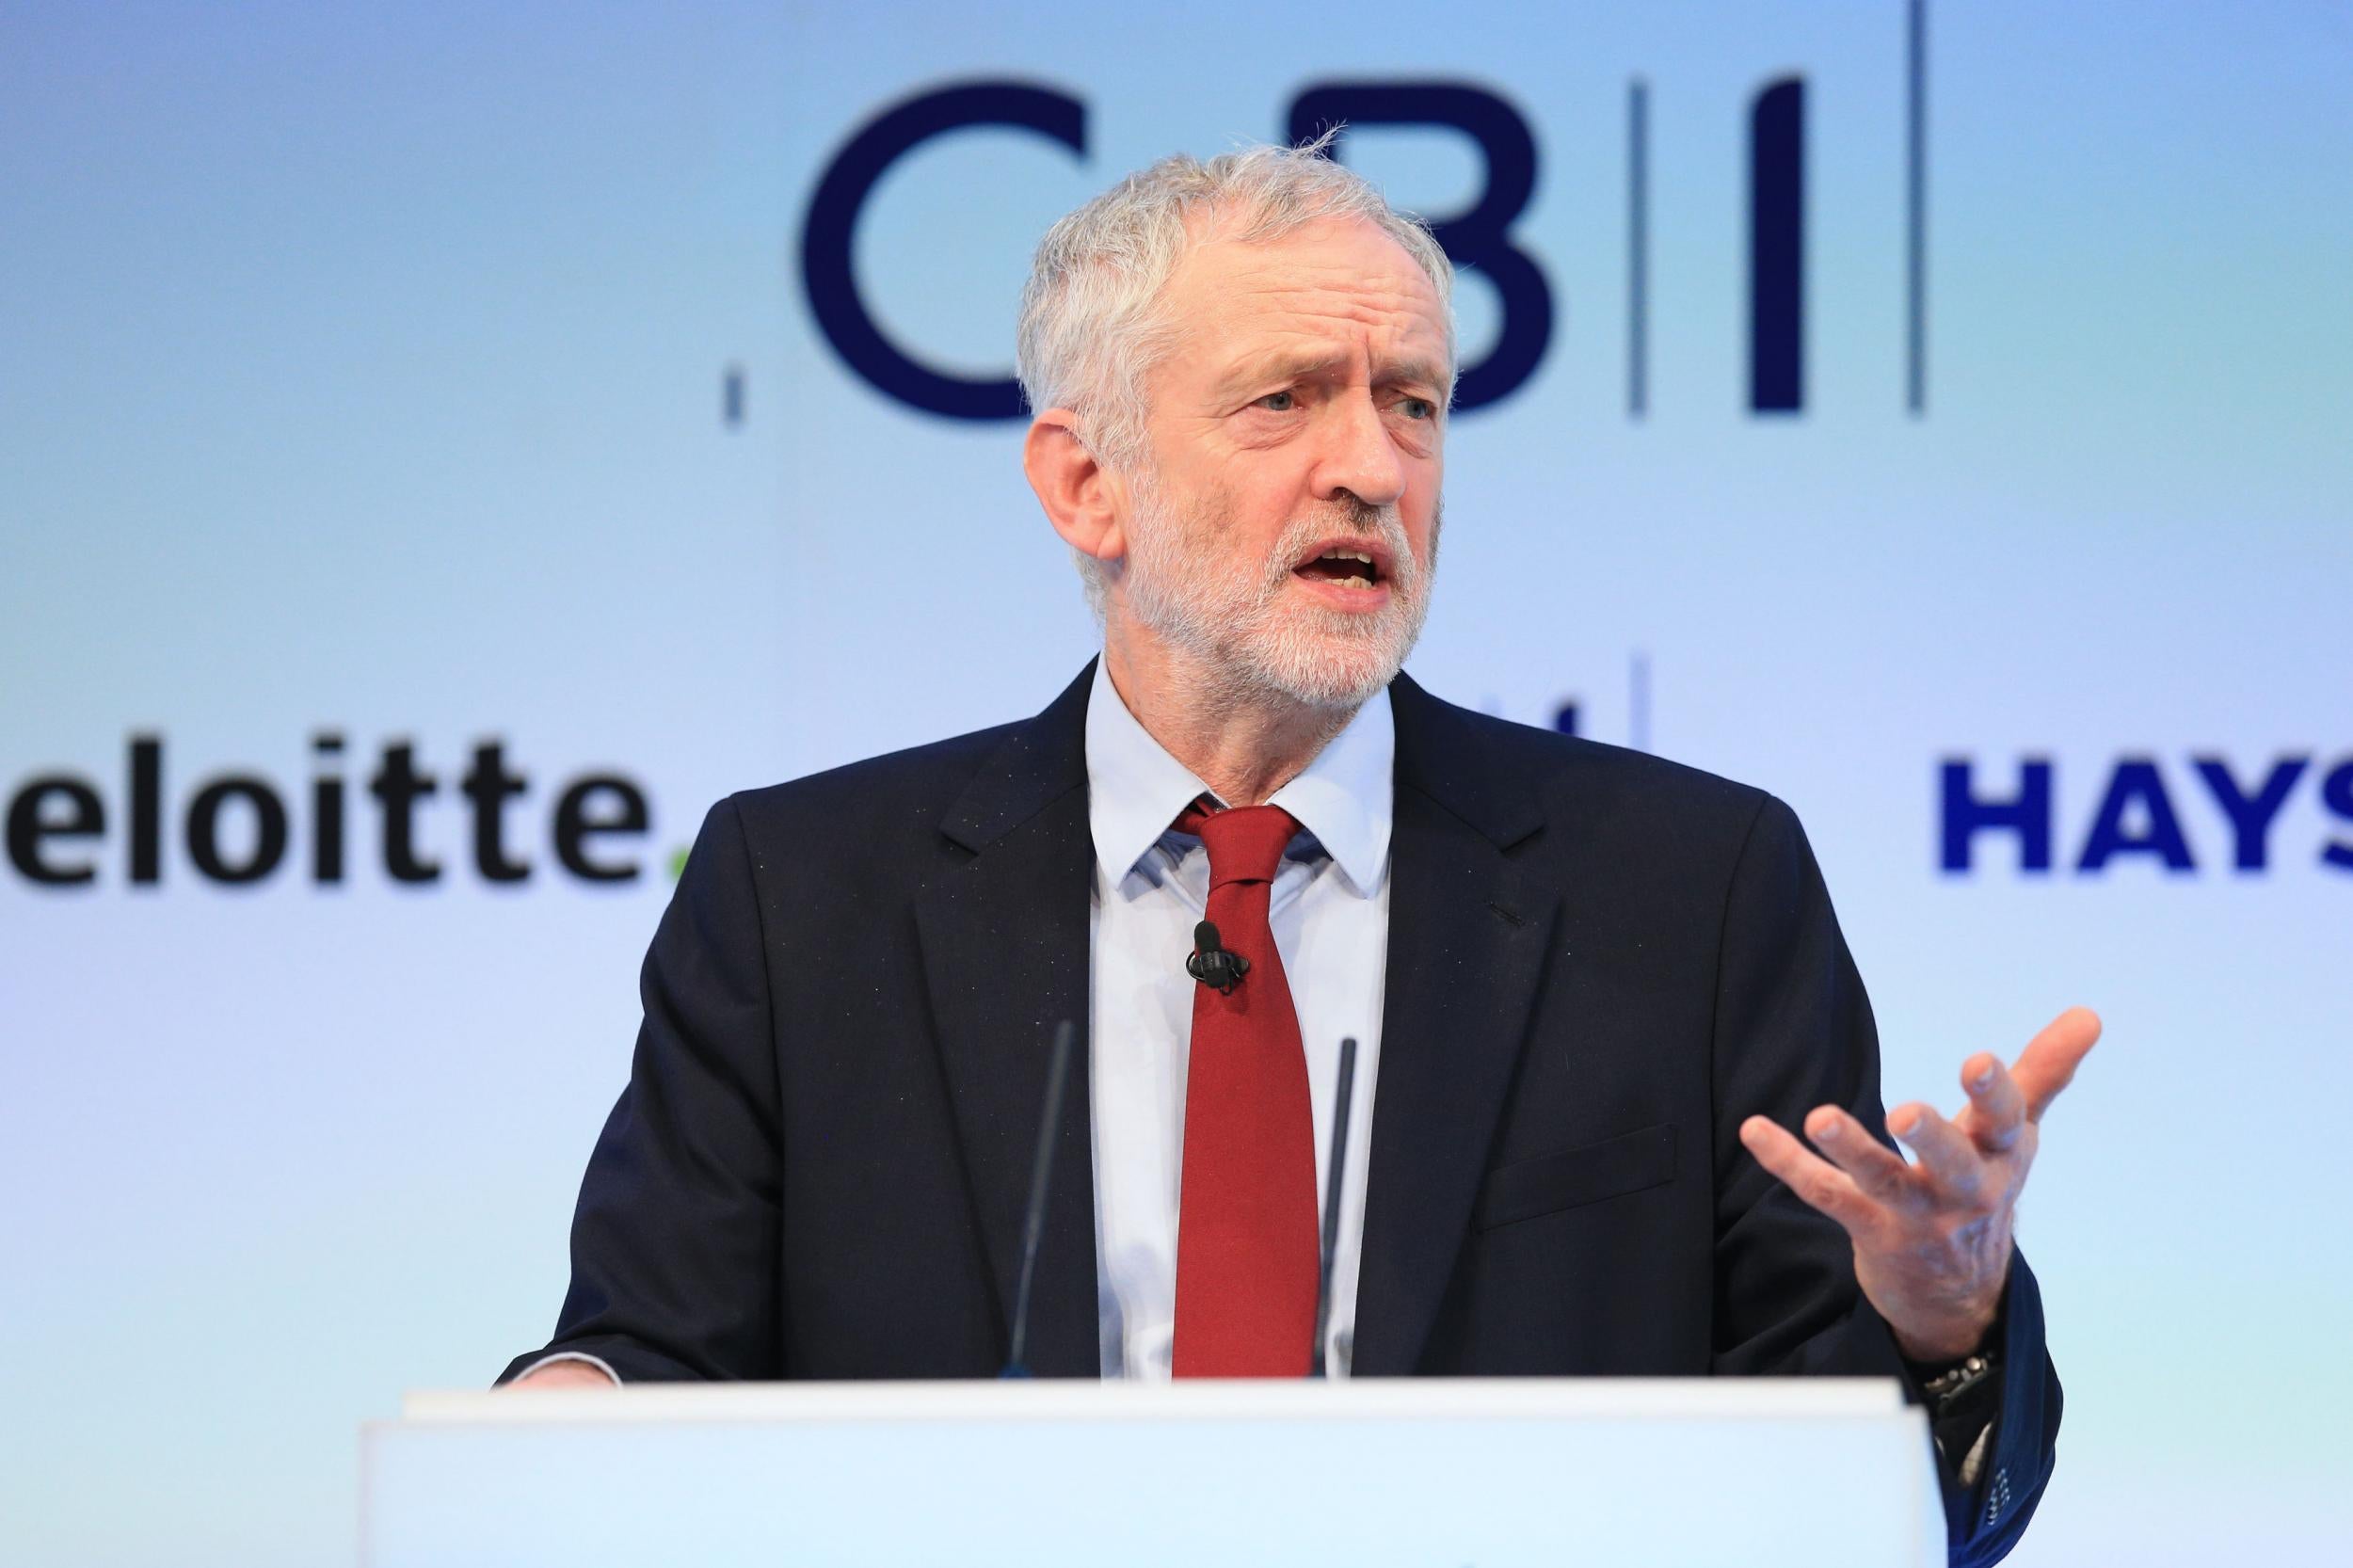 Jeremy Corbyn at the Confederation of British Industry (CBI) annual conference in London